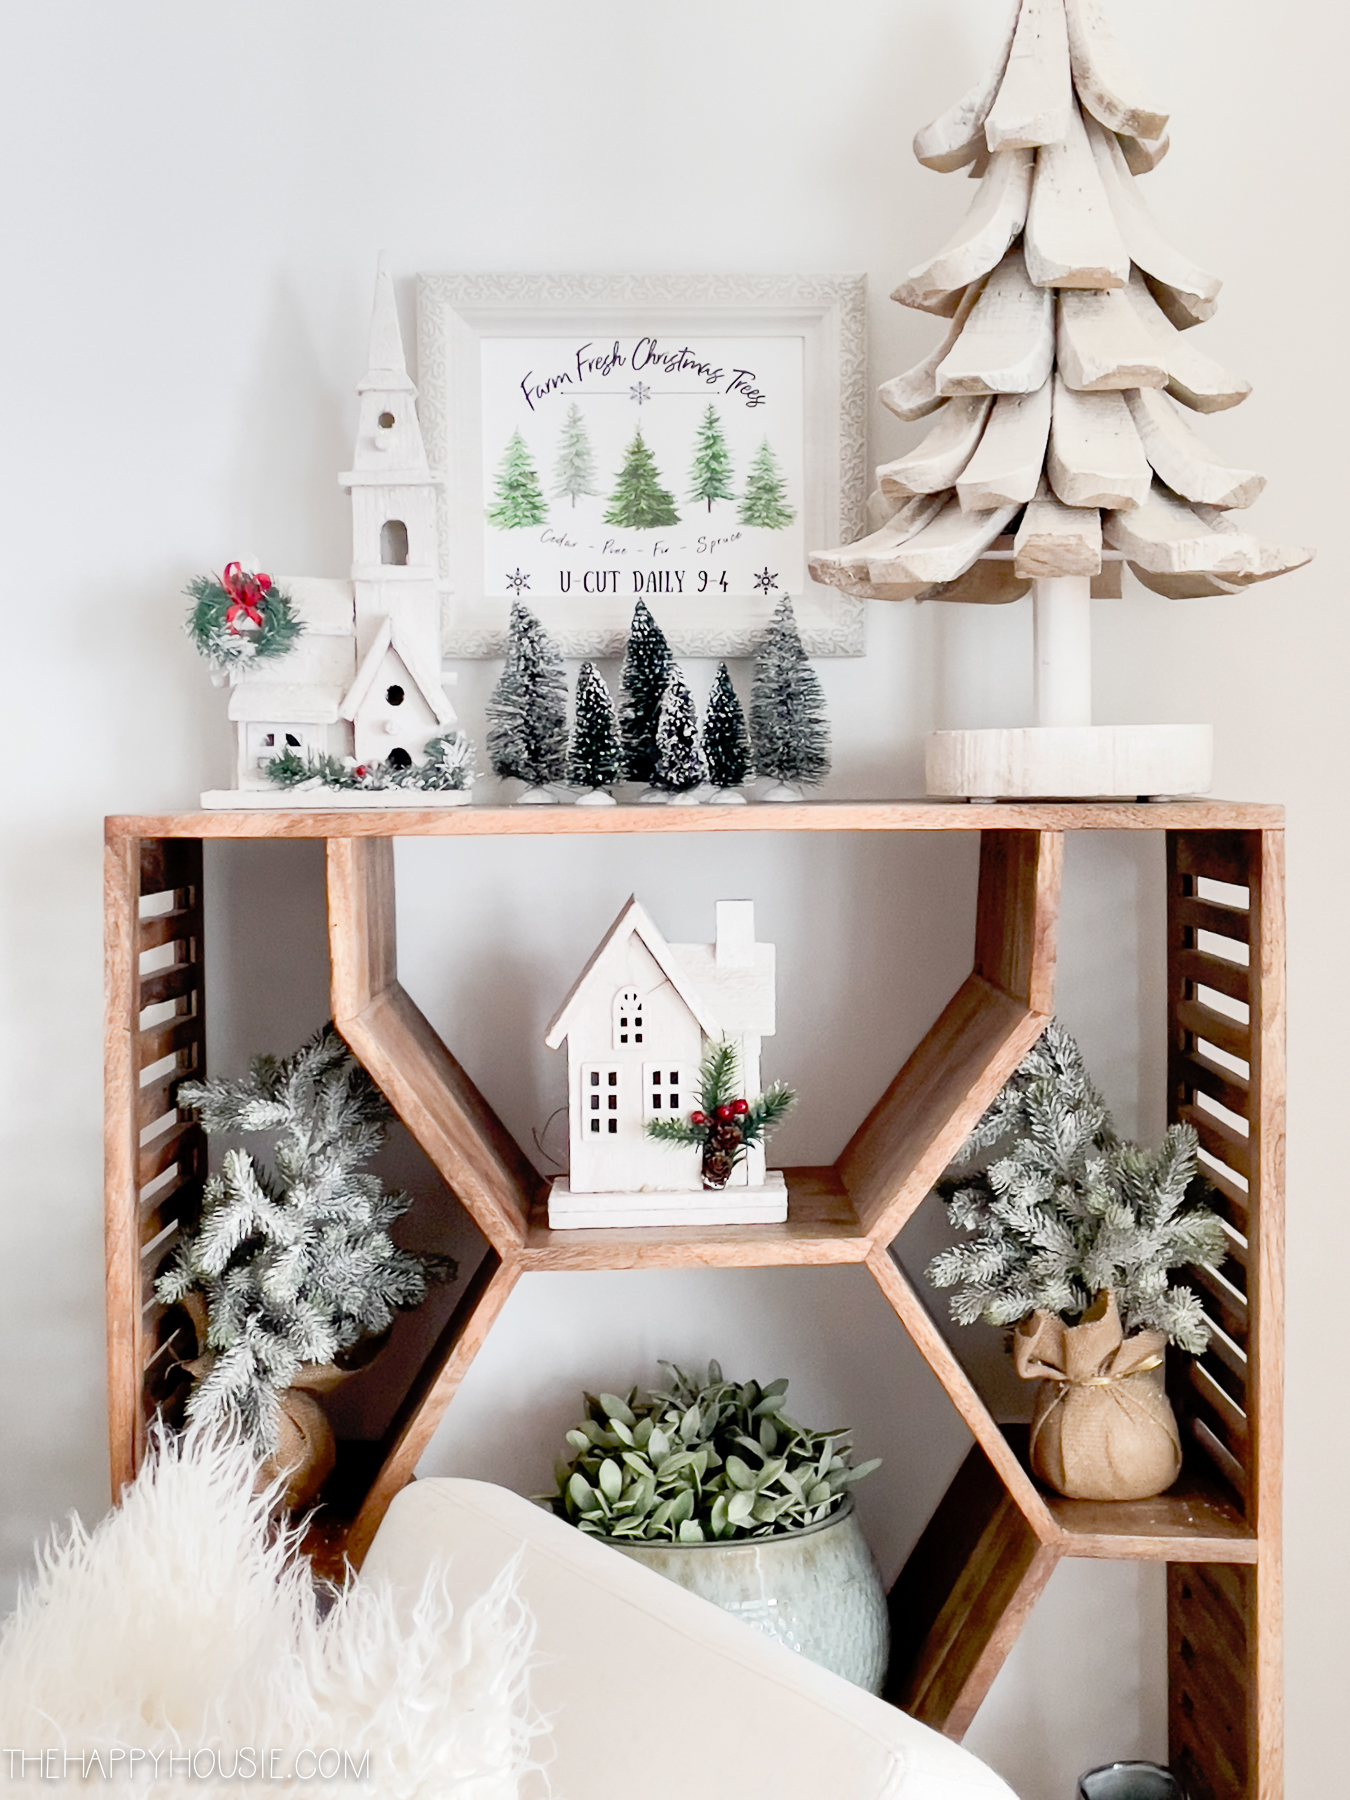 There is a small wooden Christmas house and a wooden Christmas tree on the shelf.